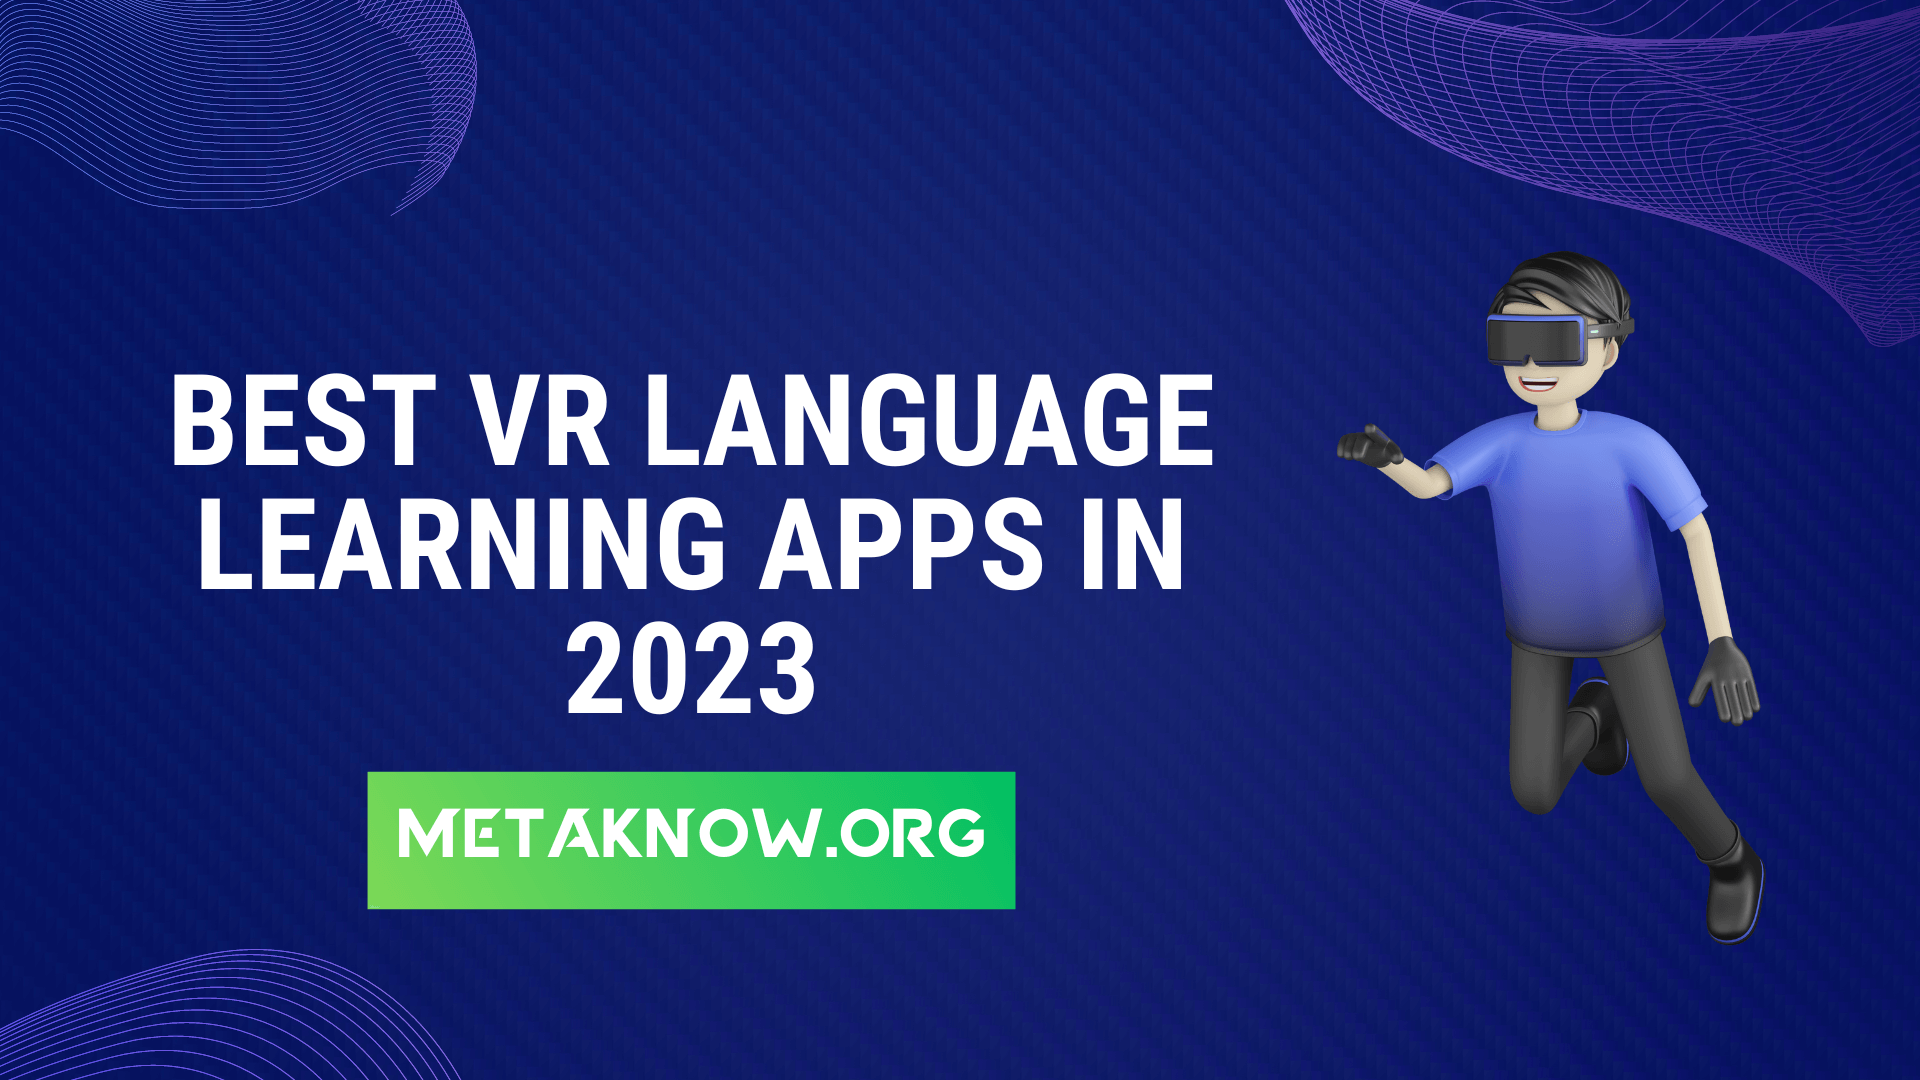 Best VR Language Learning Apps in 2023